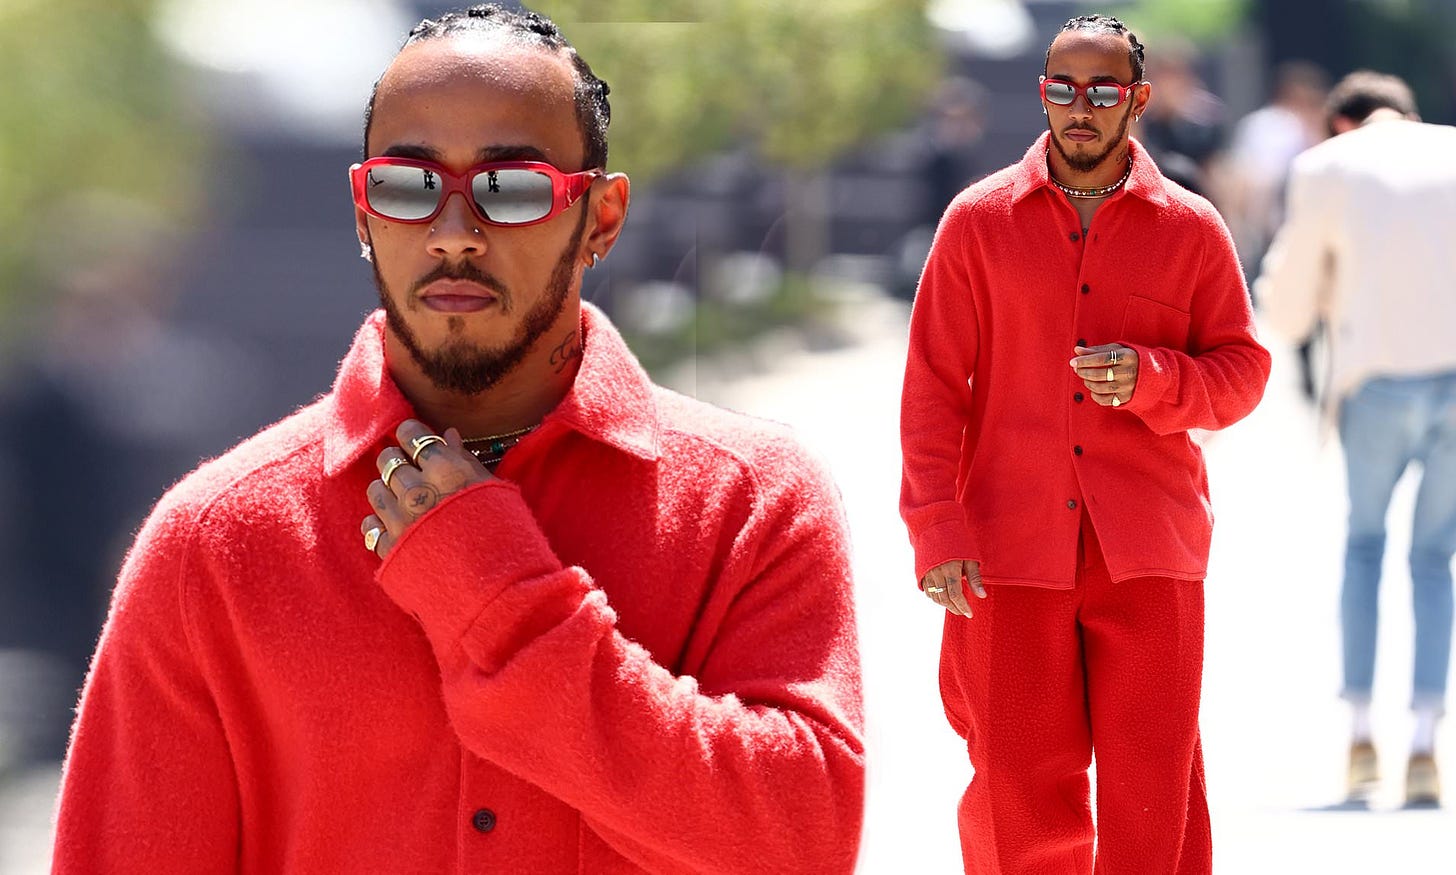 Lewis Hamilton defies the heat in a red FLEECE co-ord ahead of the F1 Grand  Prix in Bahrain | Daily Mail Online